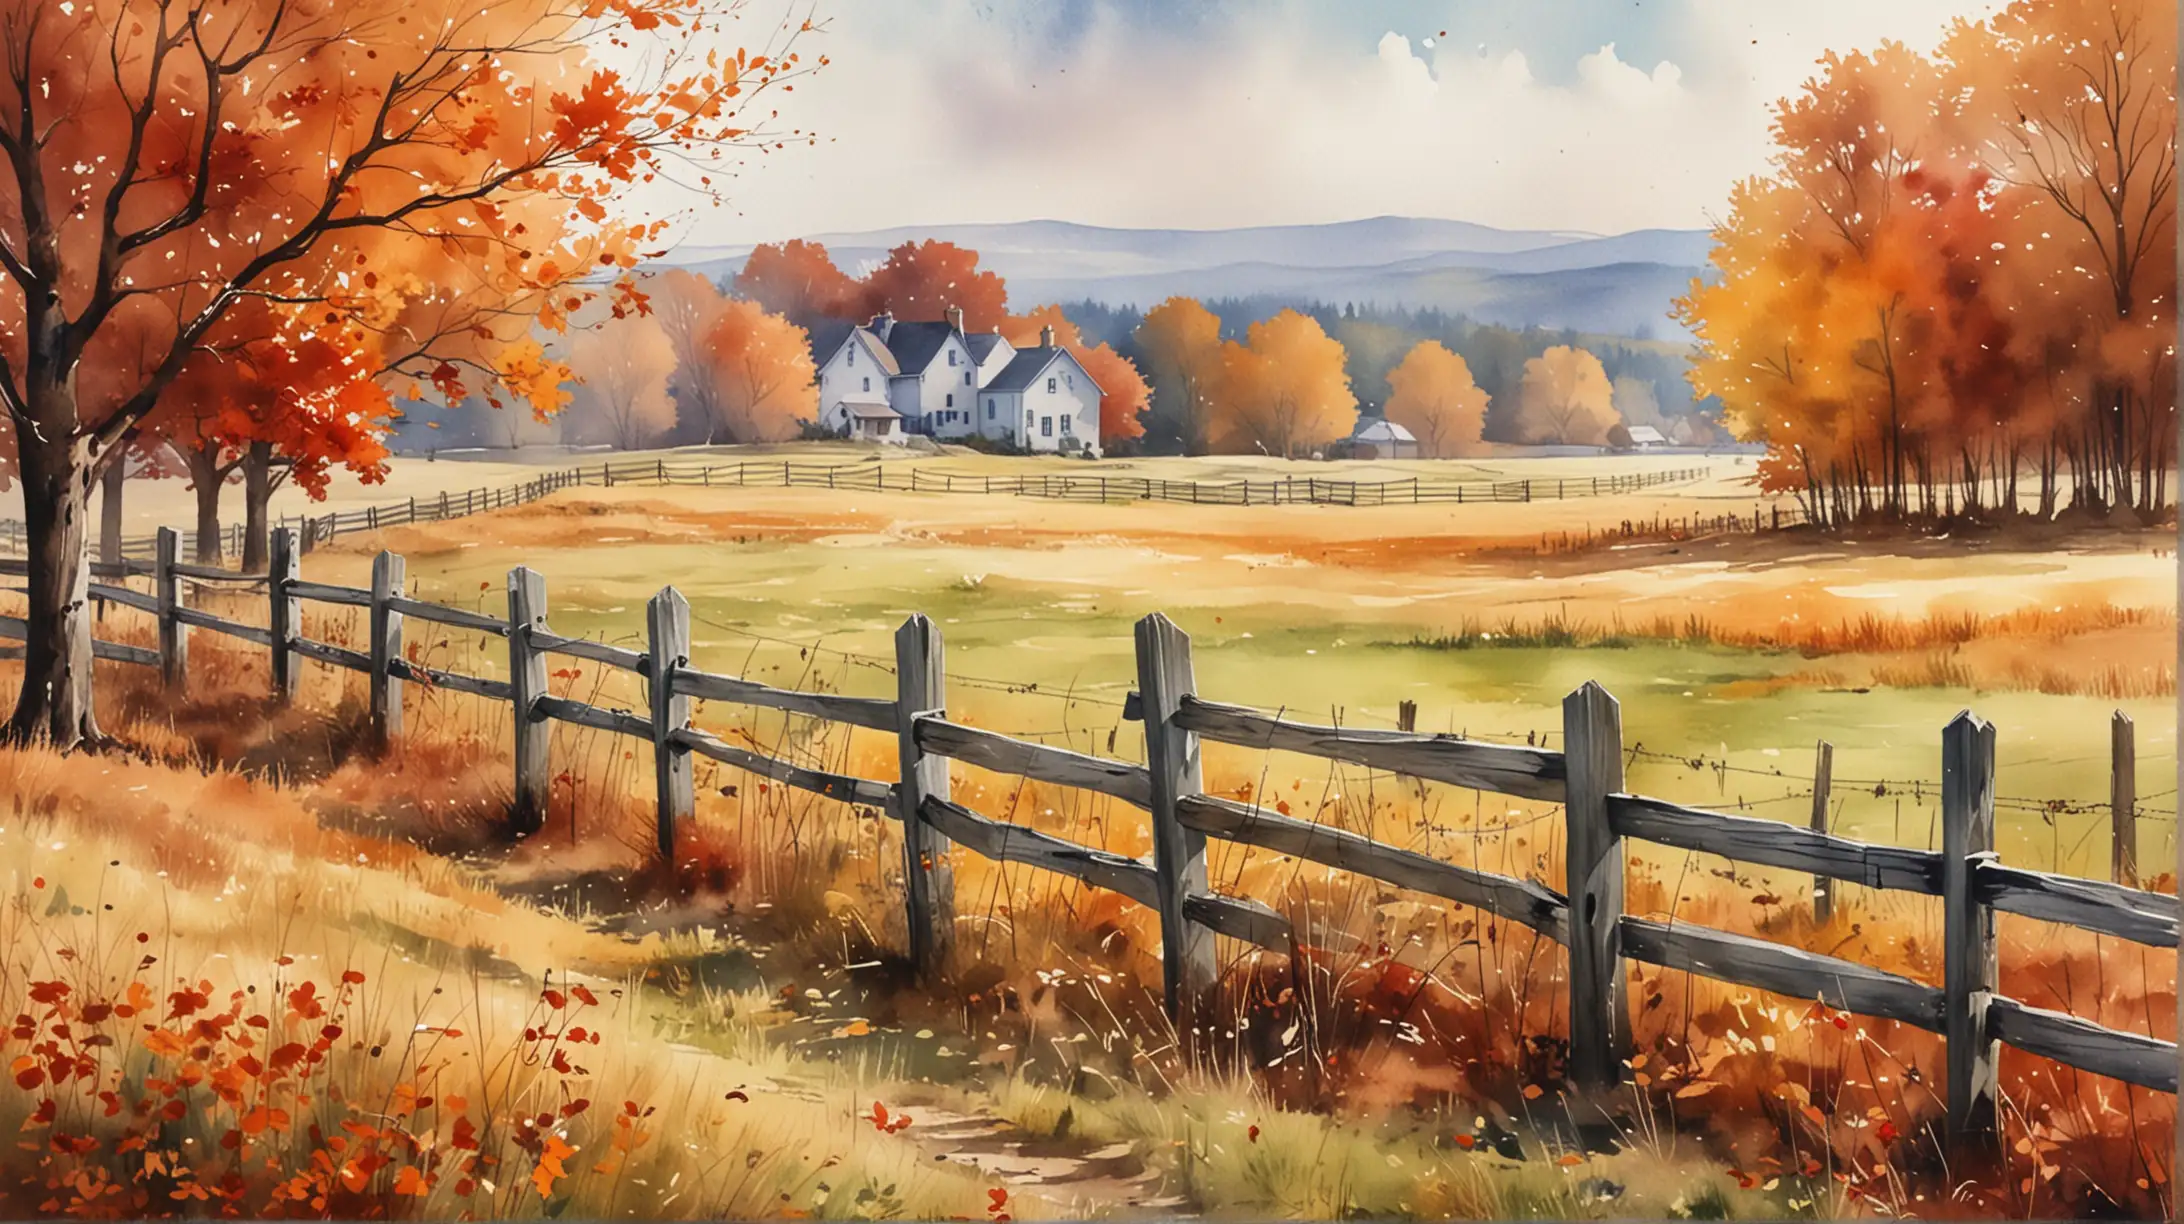 Tranquil Autumn Scene Watercolor Painting of a Rustic Fence in a Field